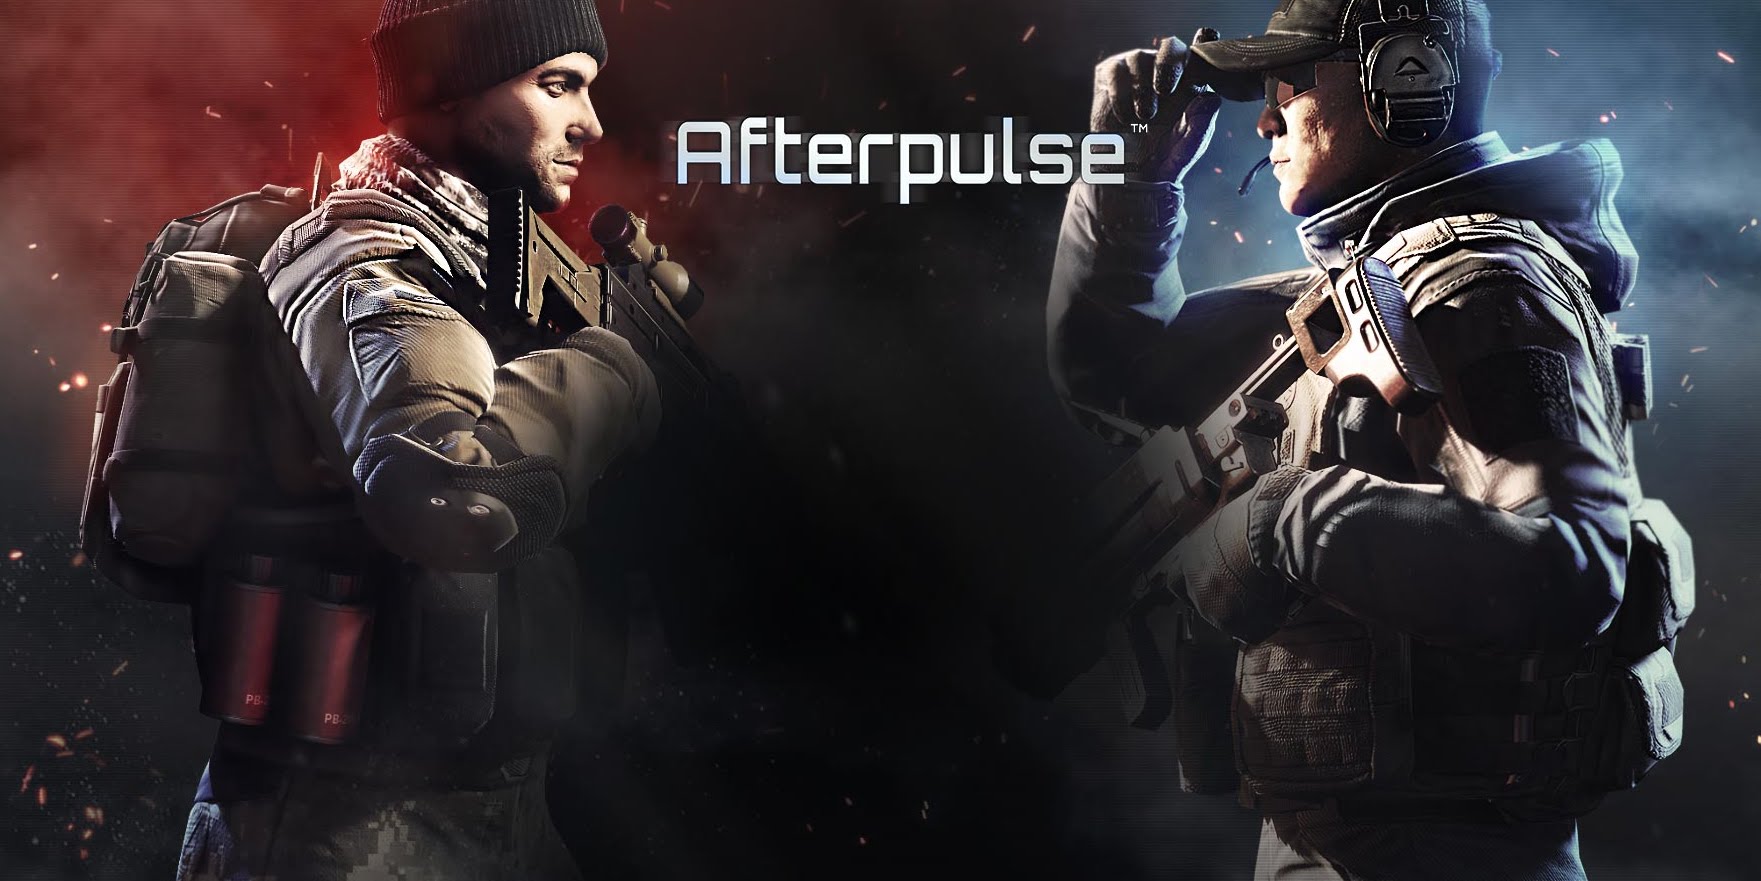 Afterpulse is a gorgeous new shooter for iOS